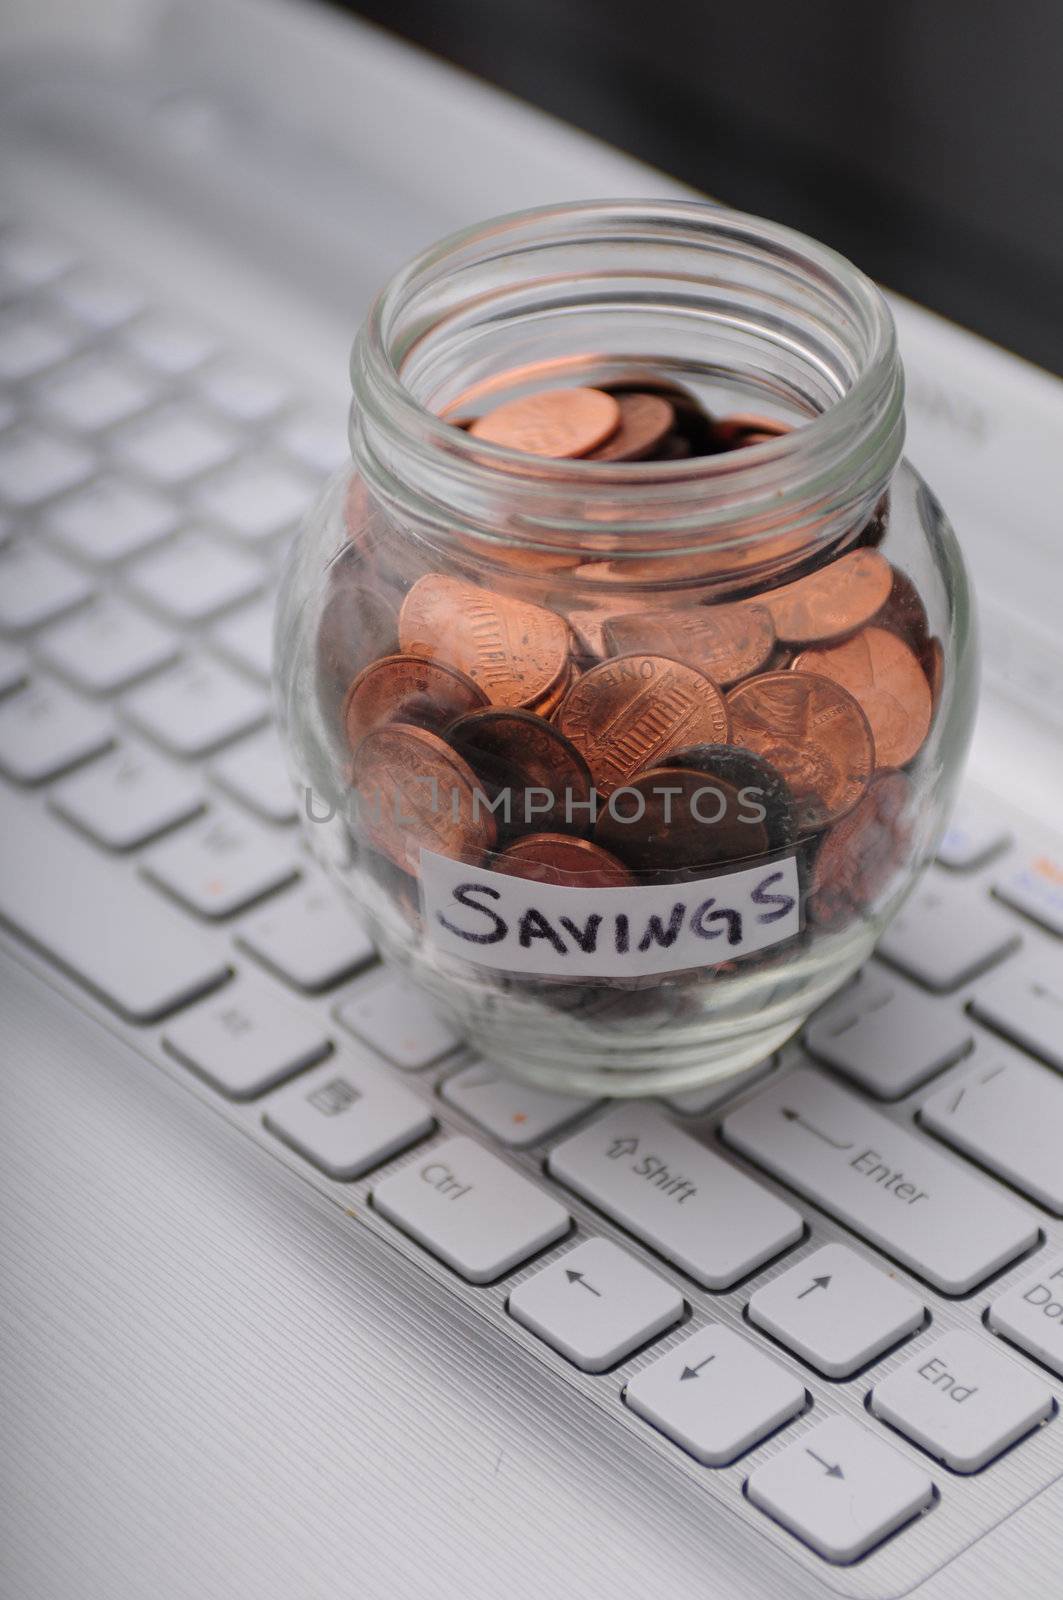 Every penny counts in business savings concept with jar of pennies on a business keyboard